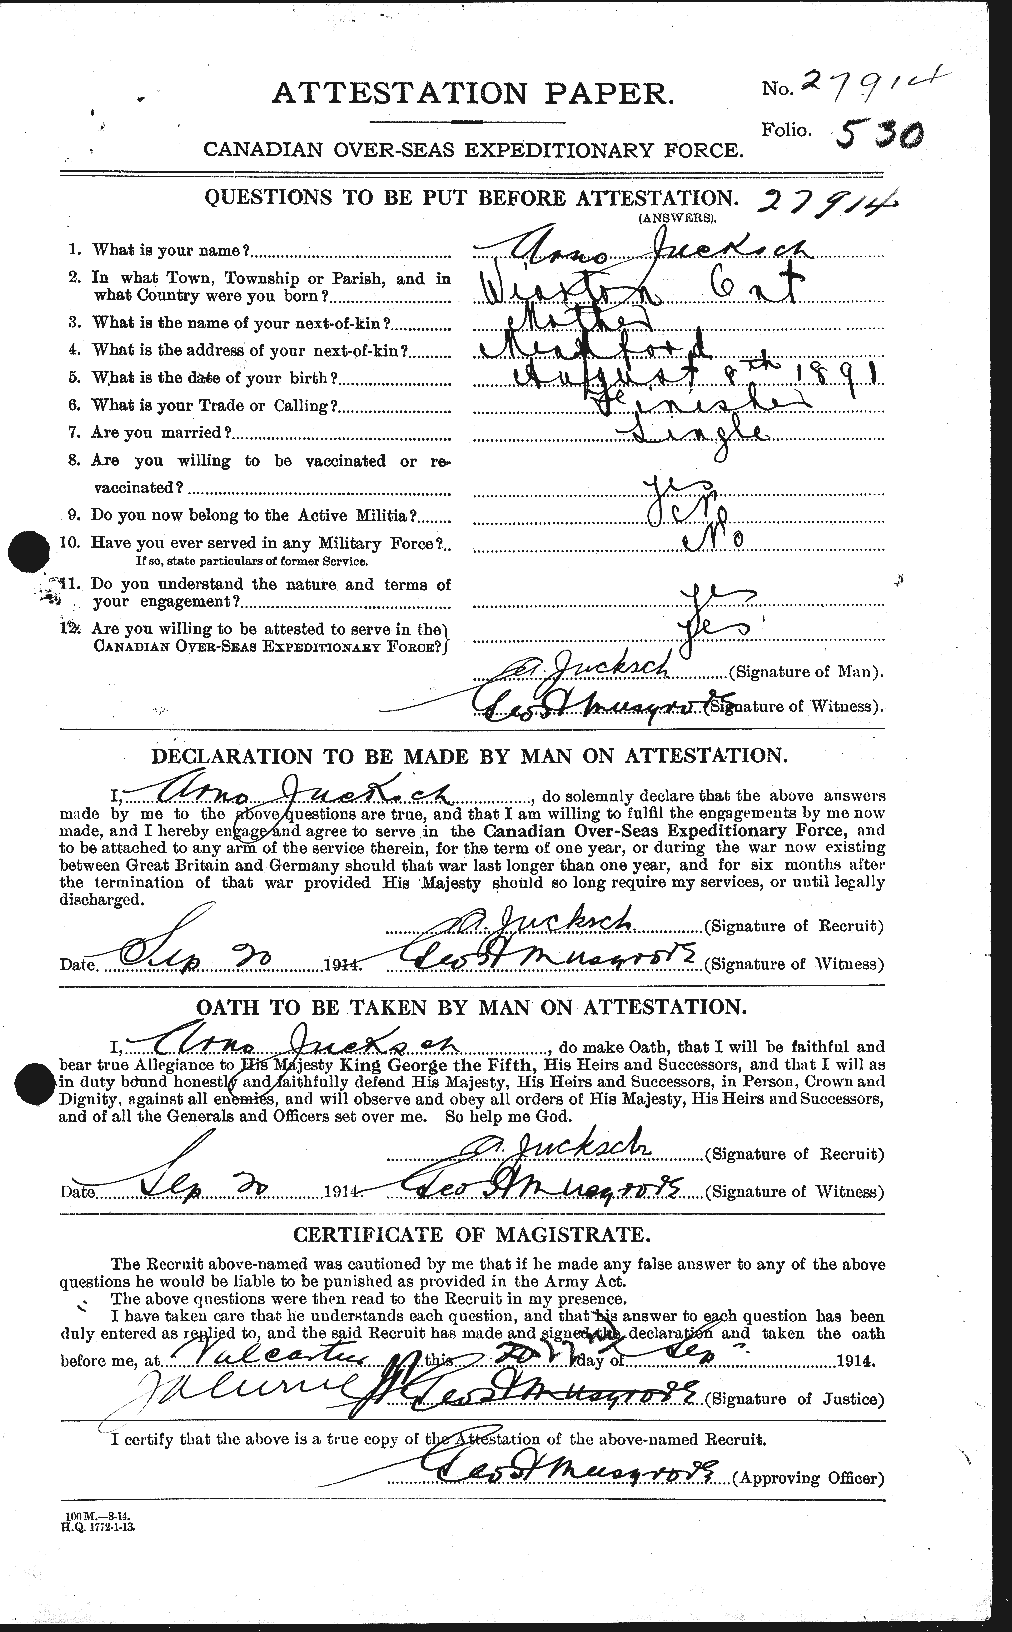 Personnel Records of the First World War - CEF 424157a